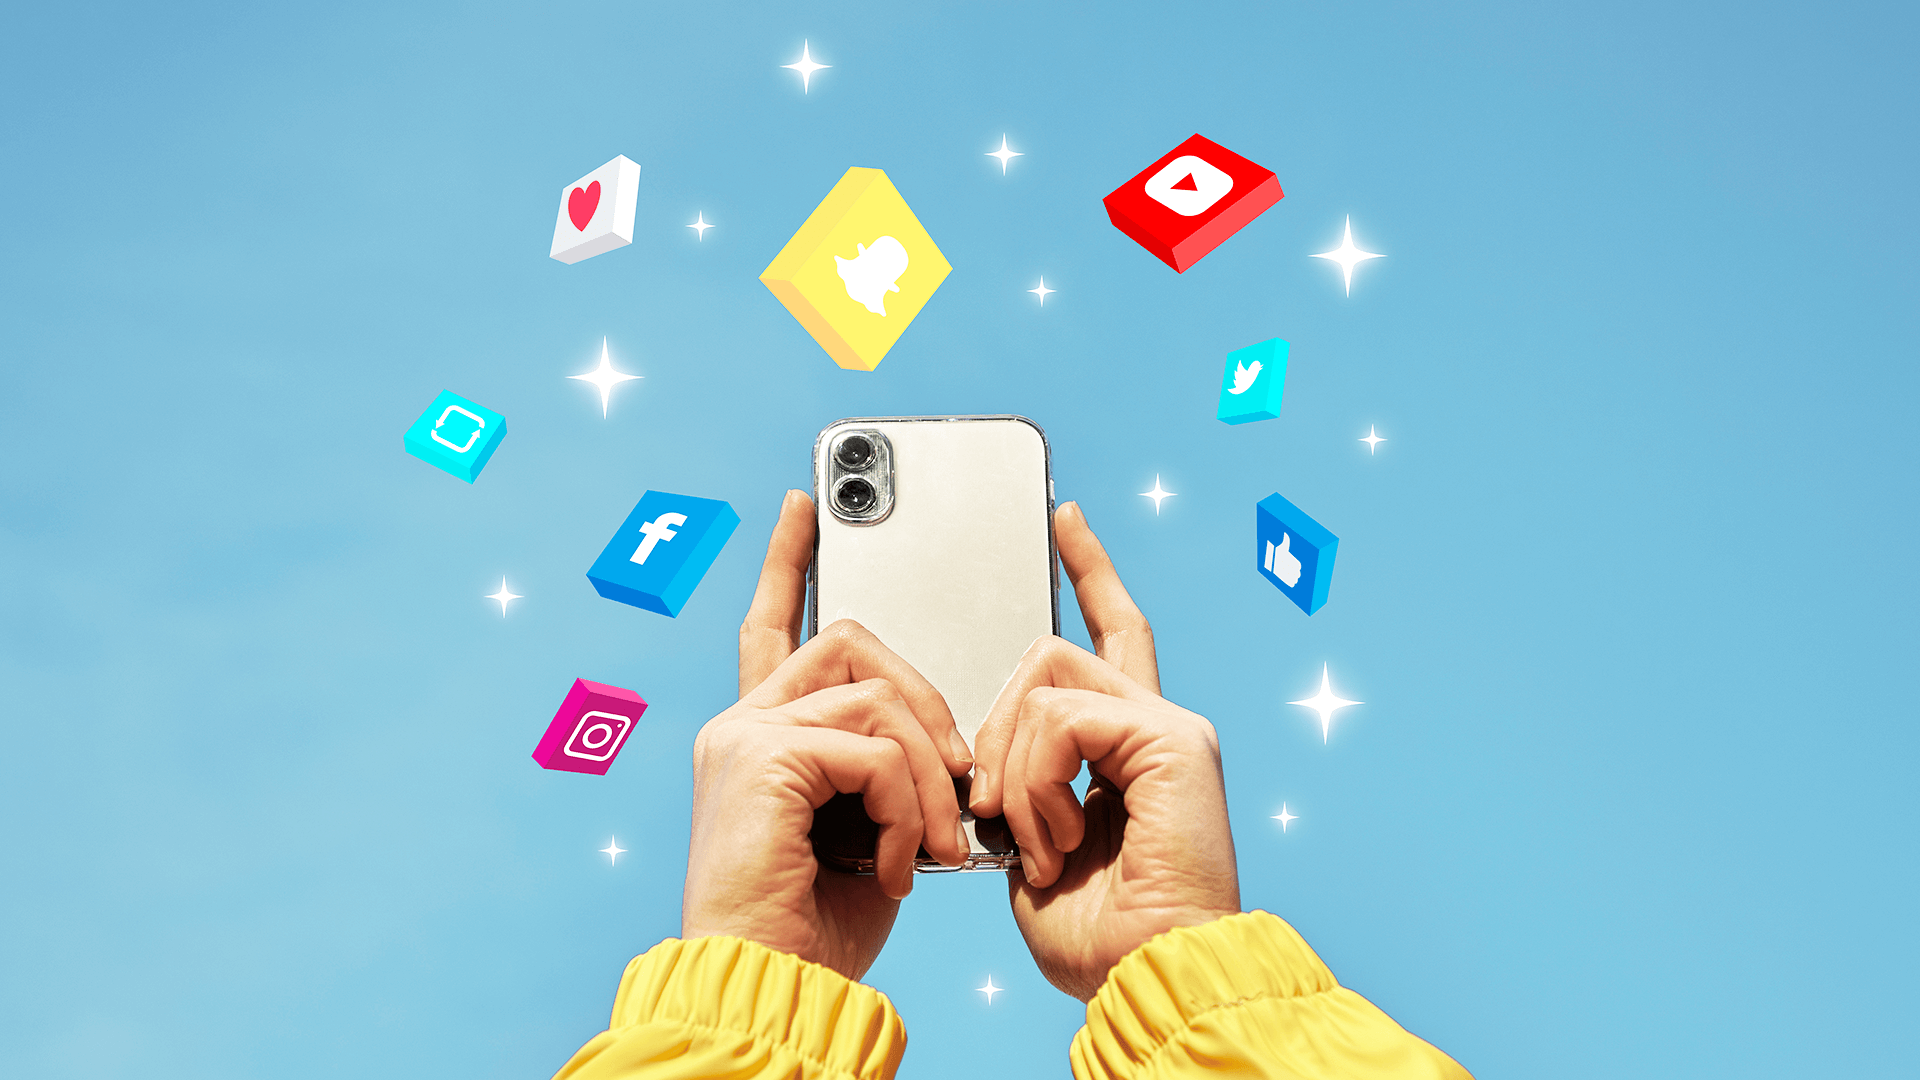 hands holding a phone with social media icons around it including youtube logo, snapchat logo, facebook logo, instagram logo,twitter logo, like icon, and love icon